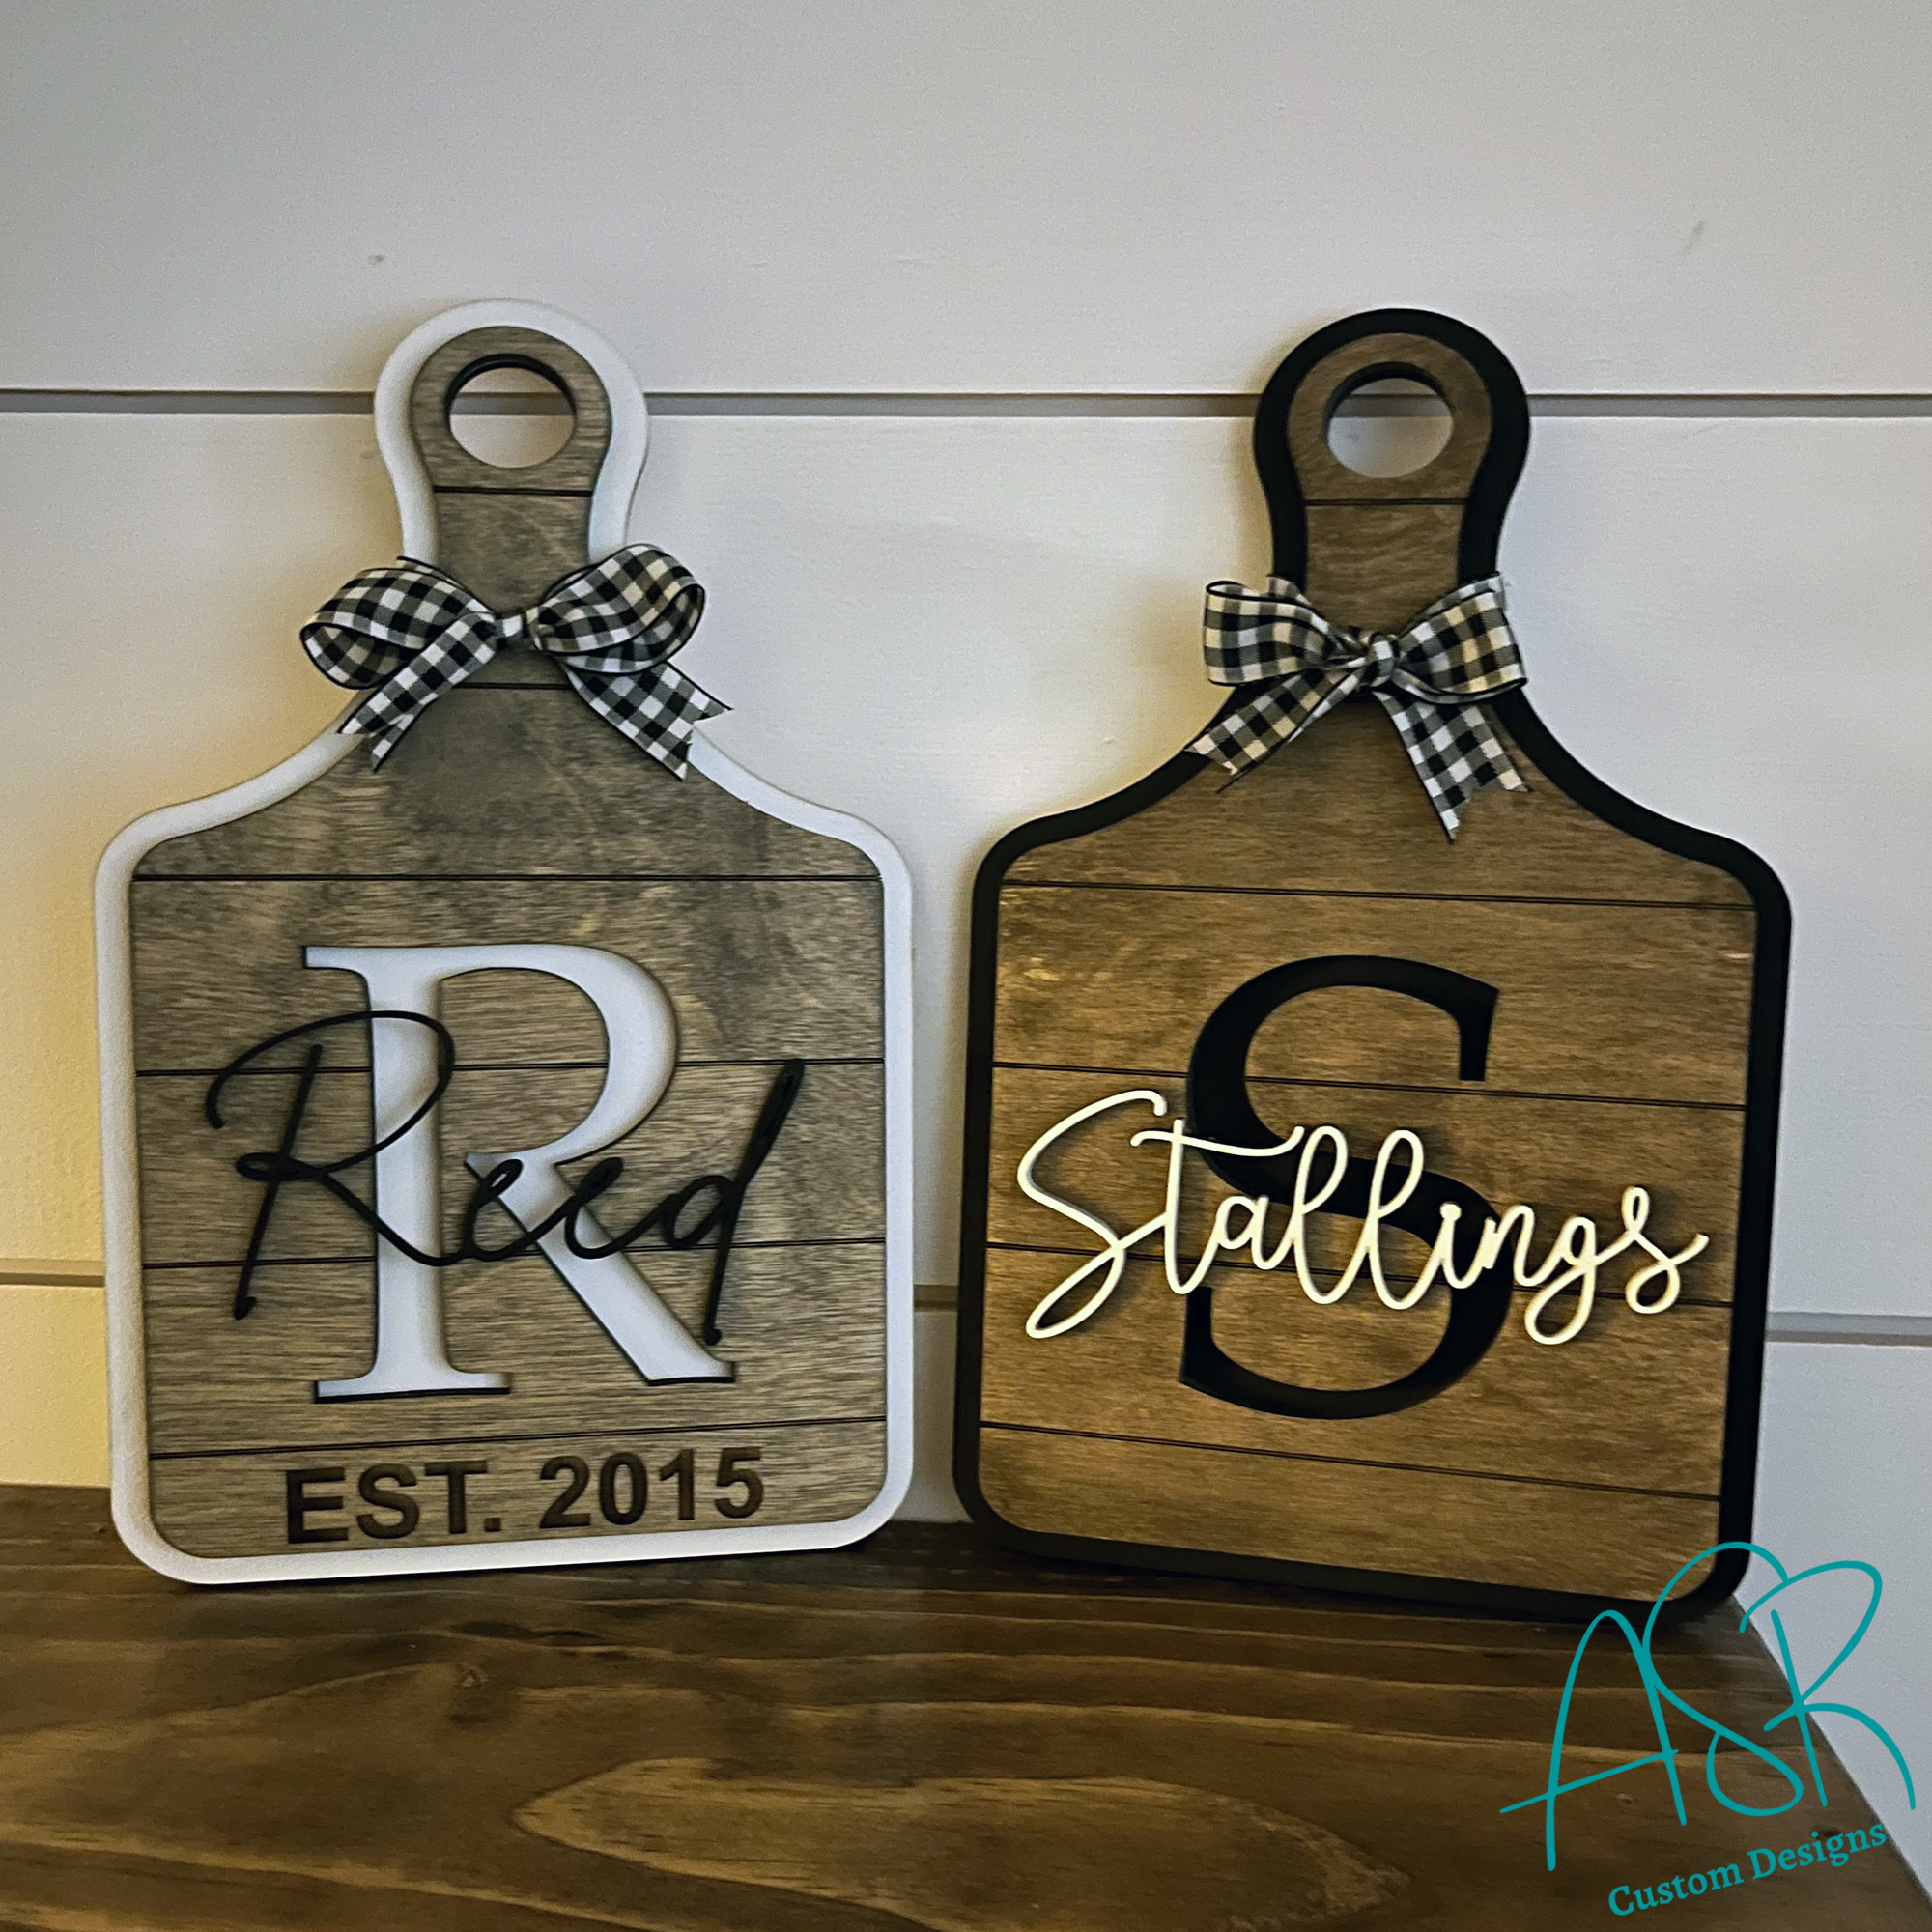 Decorative Mini Cutting Board with Initial, Last Name and Established – ASR  Custom Designs